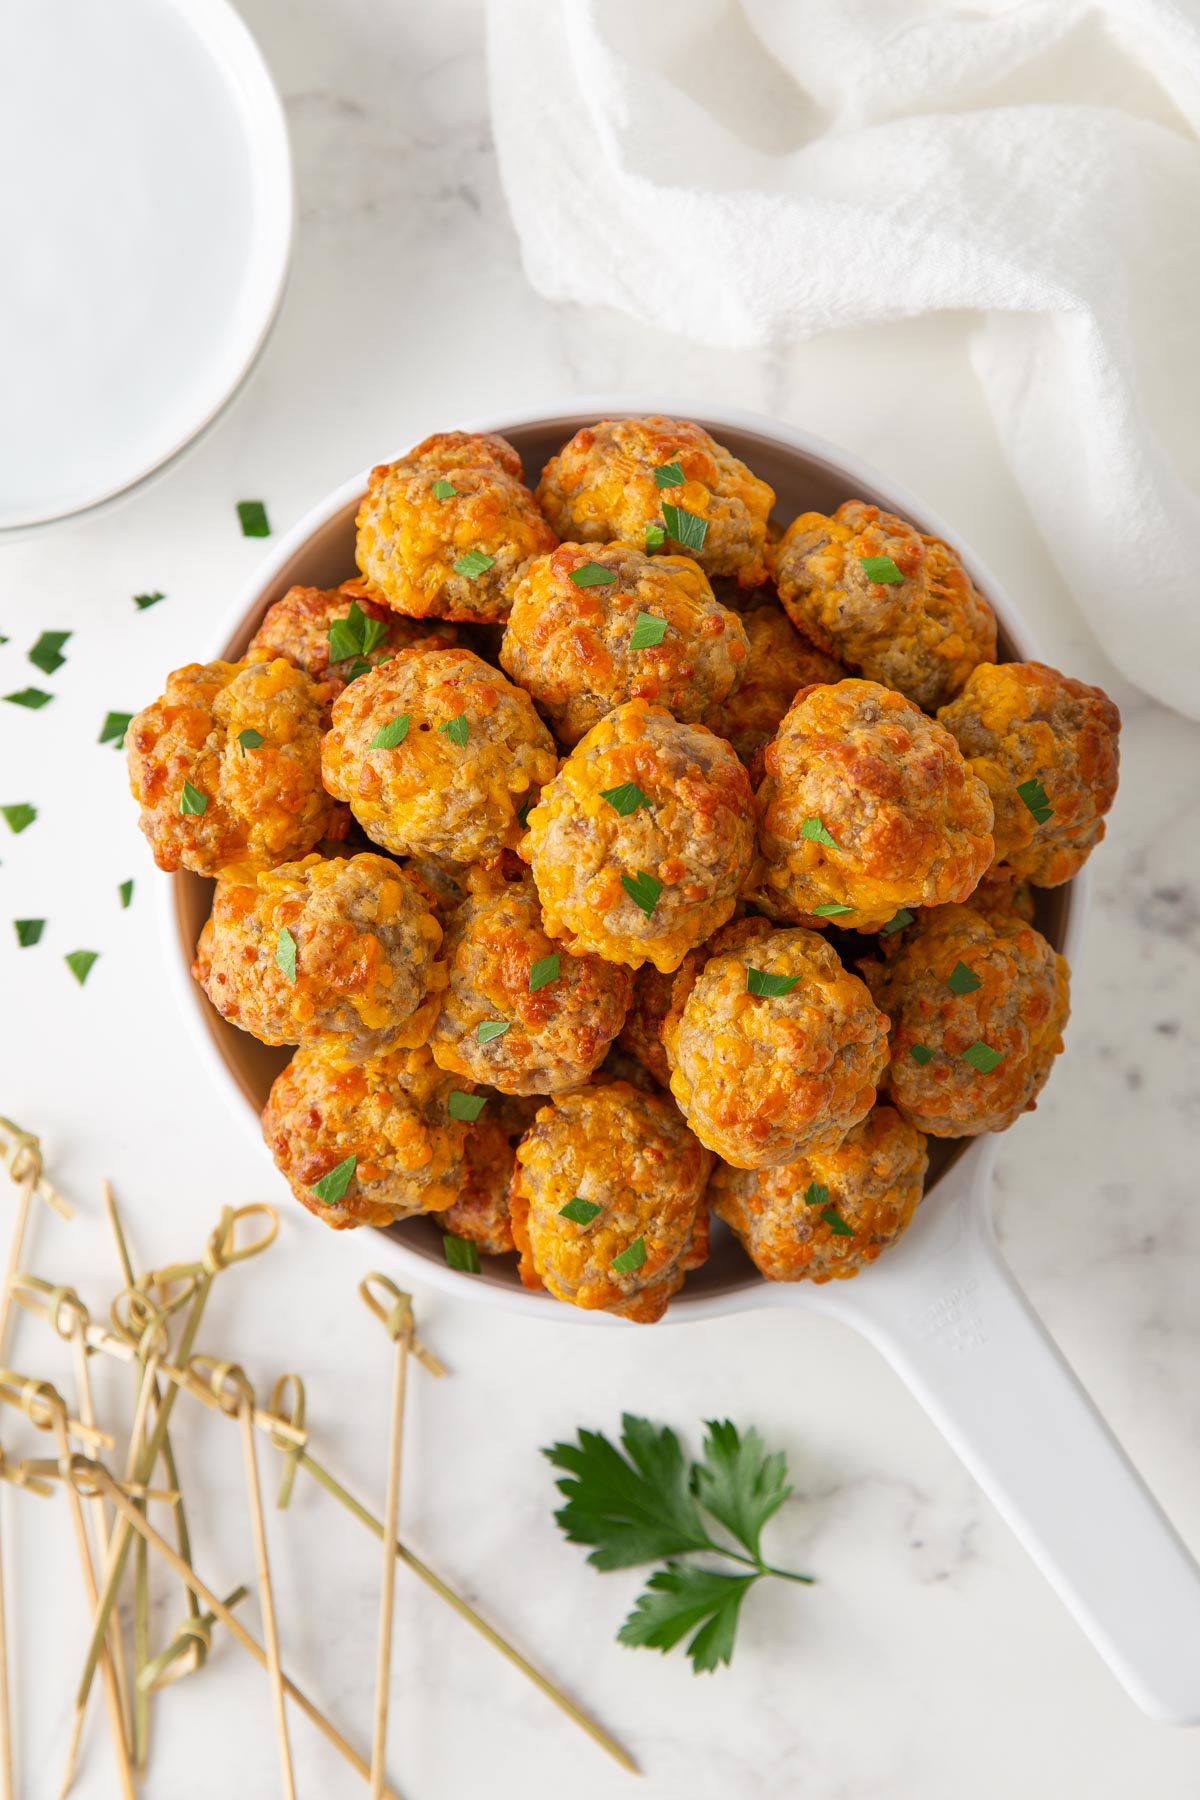 Overhead view of sausage cheese balls in a white serving dish.